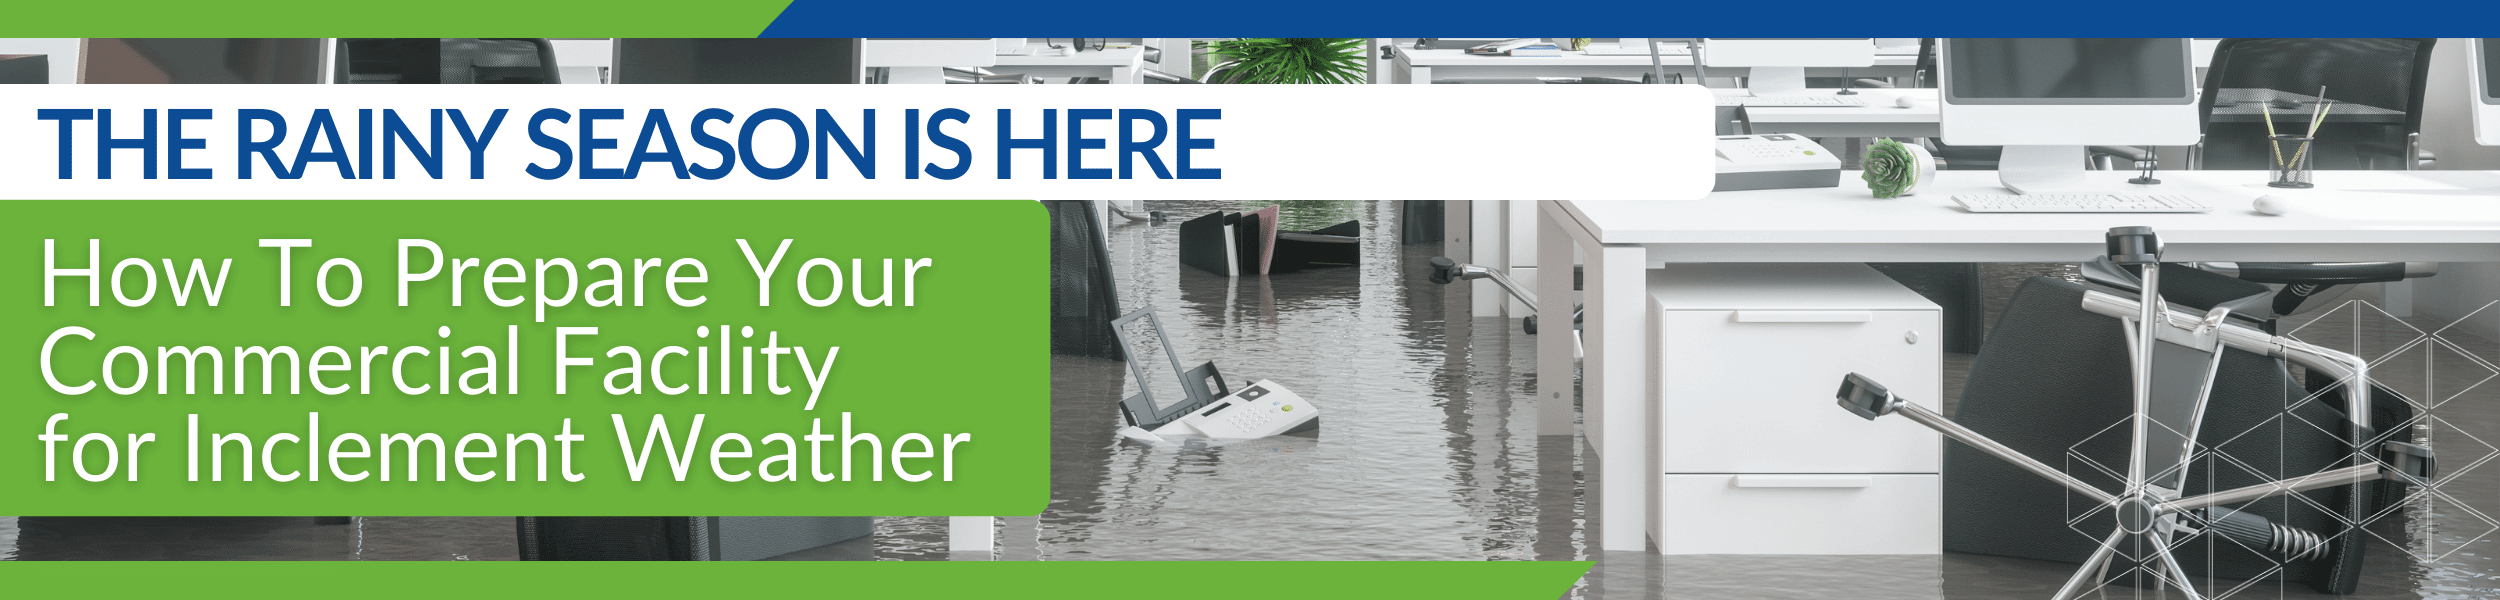 Read our tips on how to prepare your commercial facility for the upcoming rainy season. By taking these steps, you can ensure that your facility is ready for whatever the weather may bring.